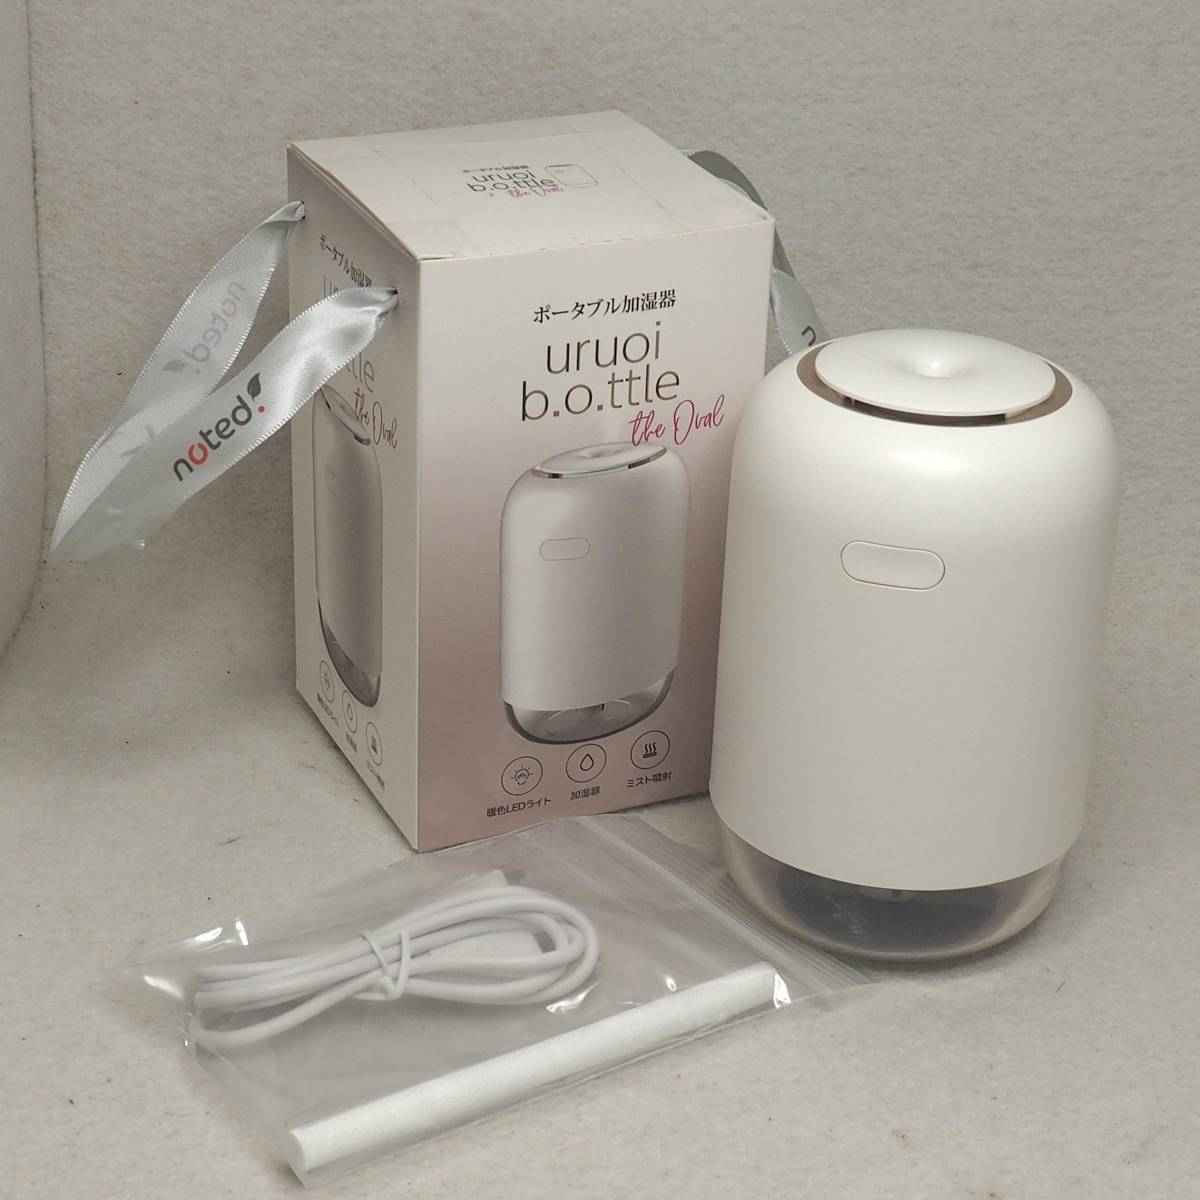  postage 490 jpy fan less & wireless! small size humidifier battery drive possible 12x8cm noted..... bottle The oval UB1143W condition excellent operation OK